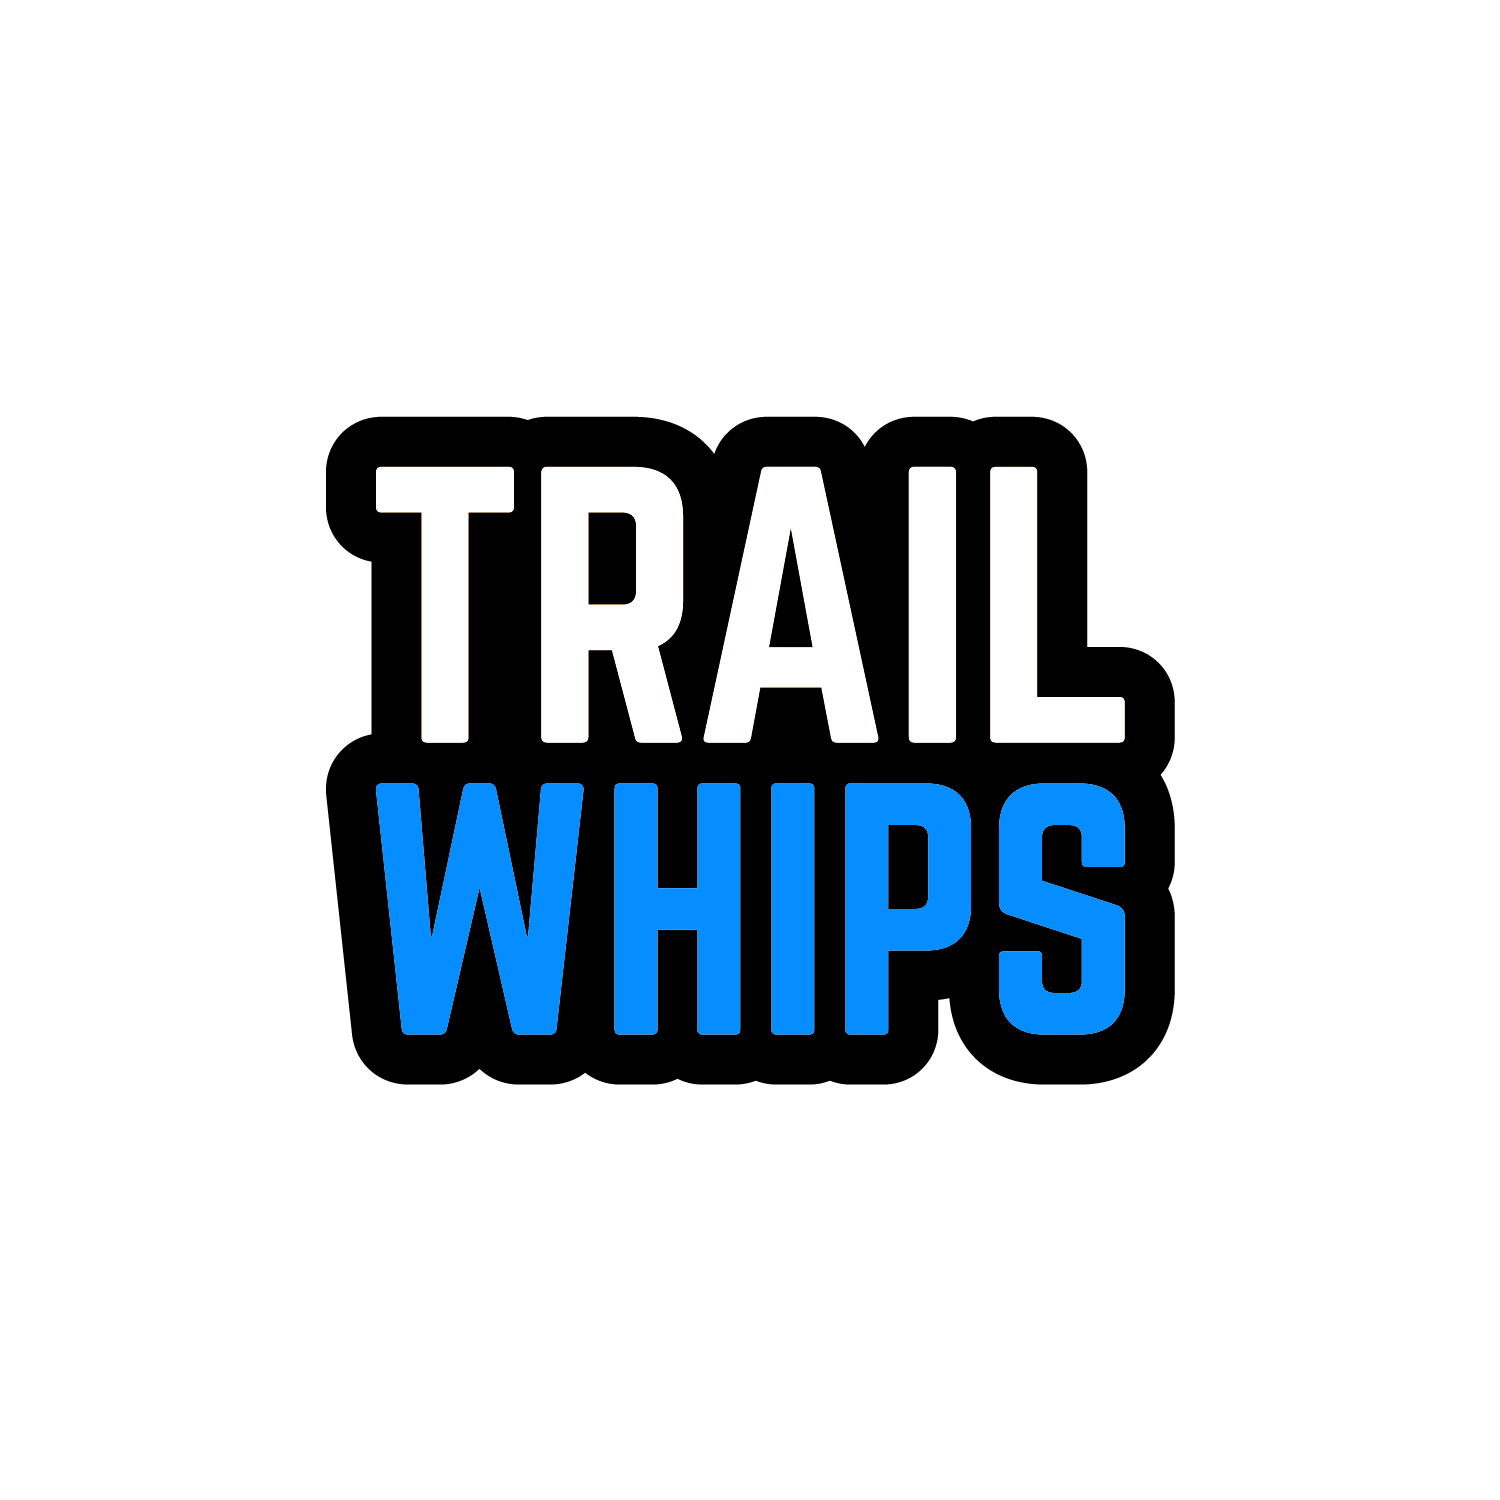 TrailWhips Bubble Square Sticker  - Black Background - TrailWhips